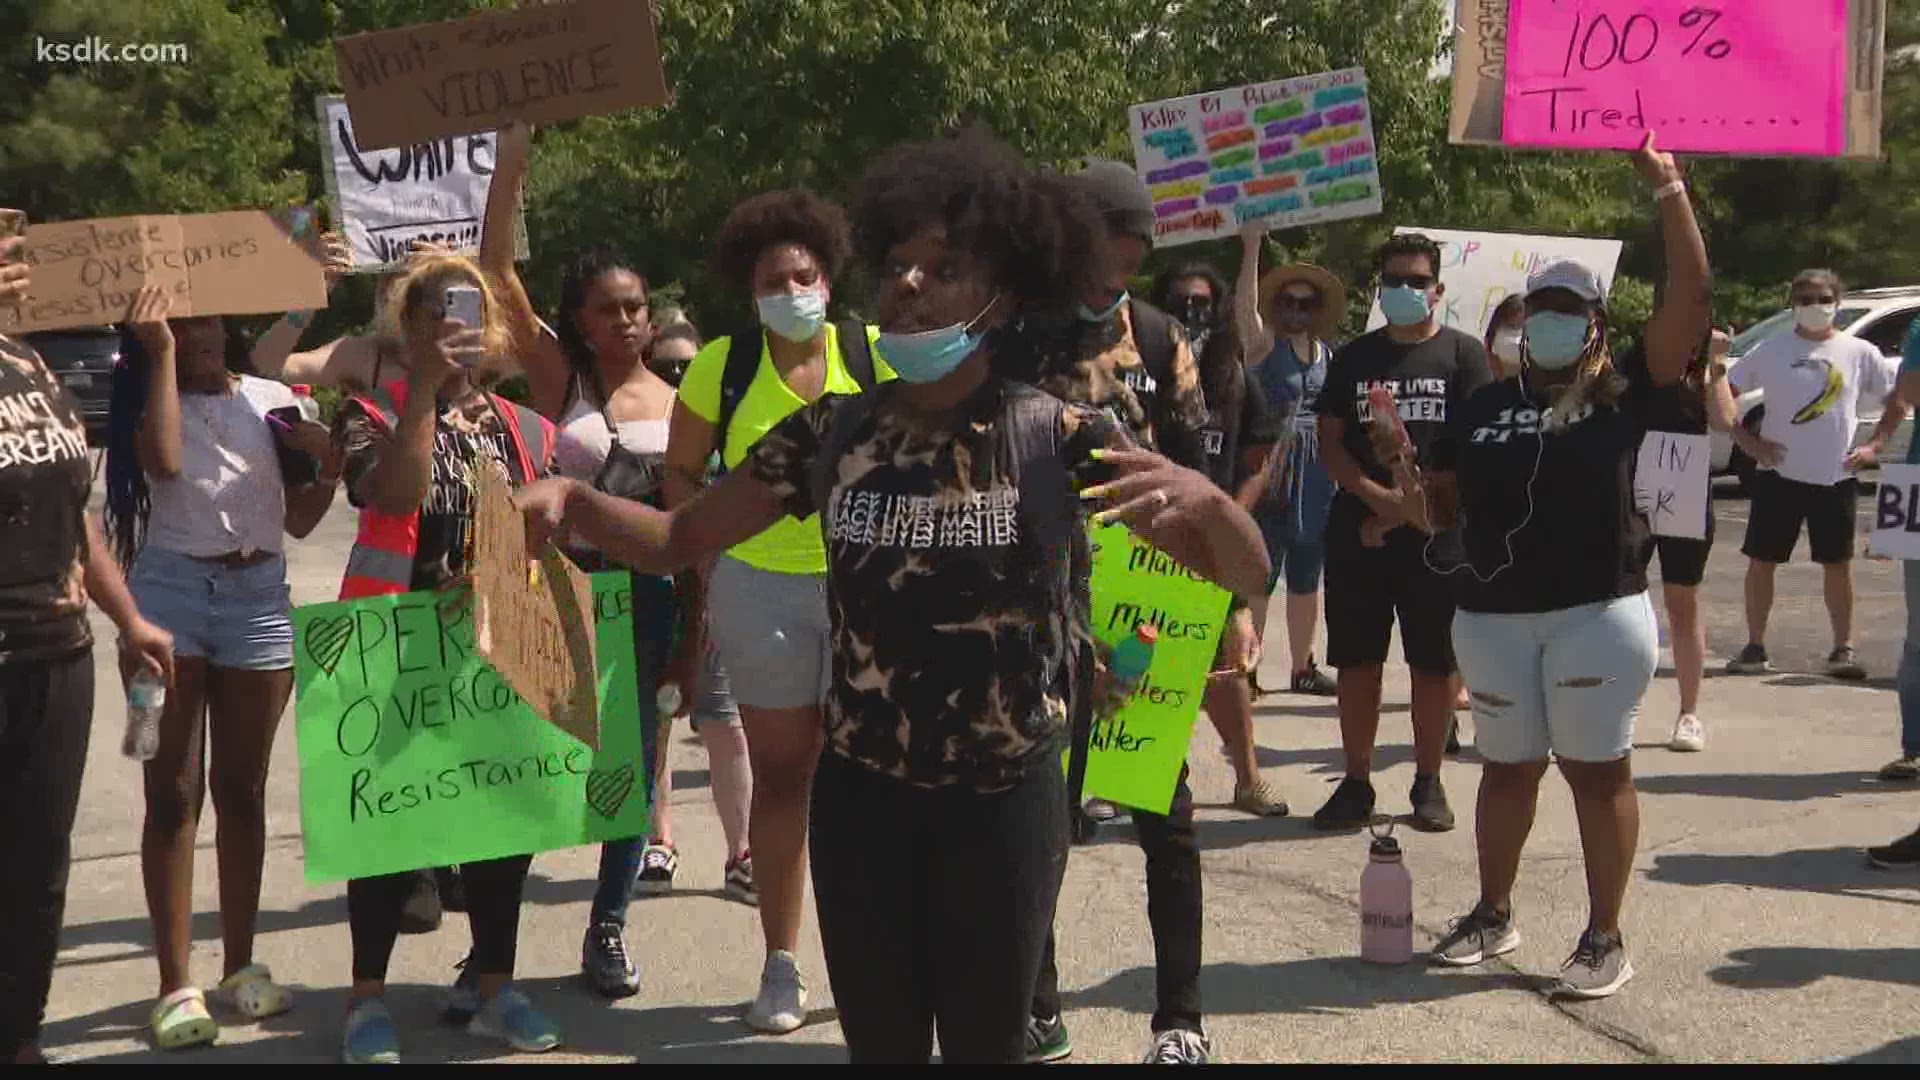 Protests are continuing to commence around the St. Louis area after the death of George Floyd in Minneapolis.